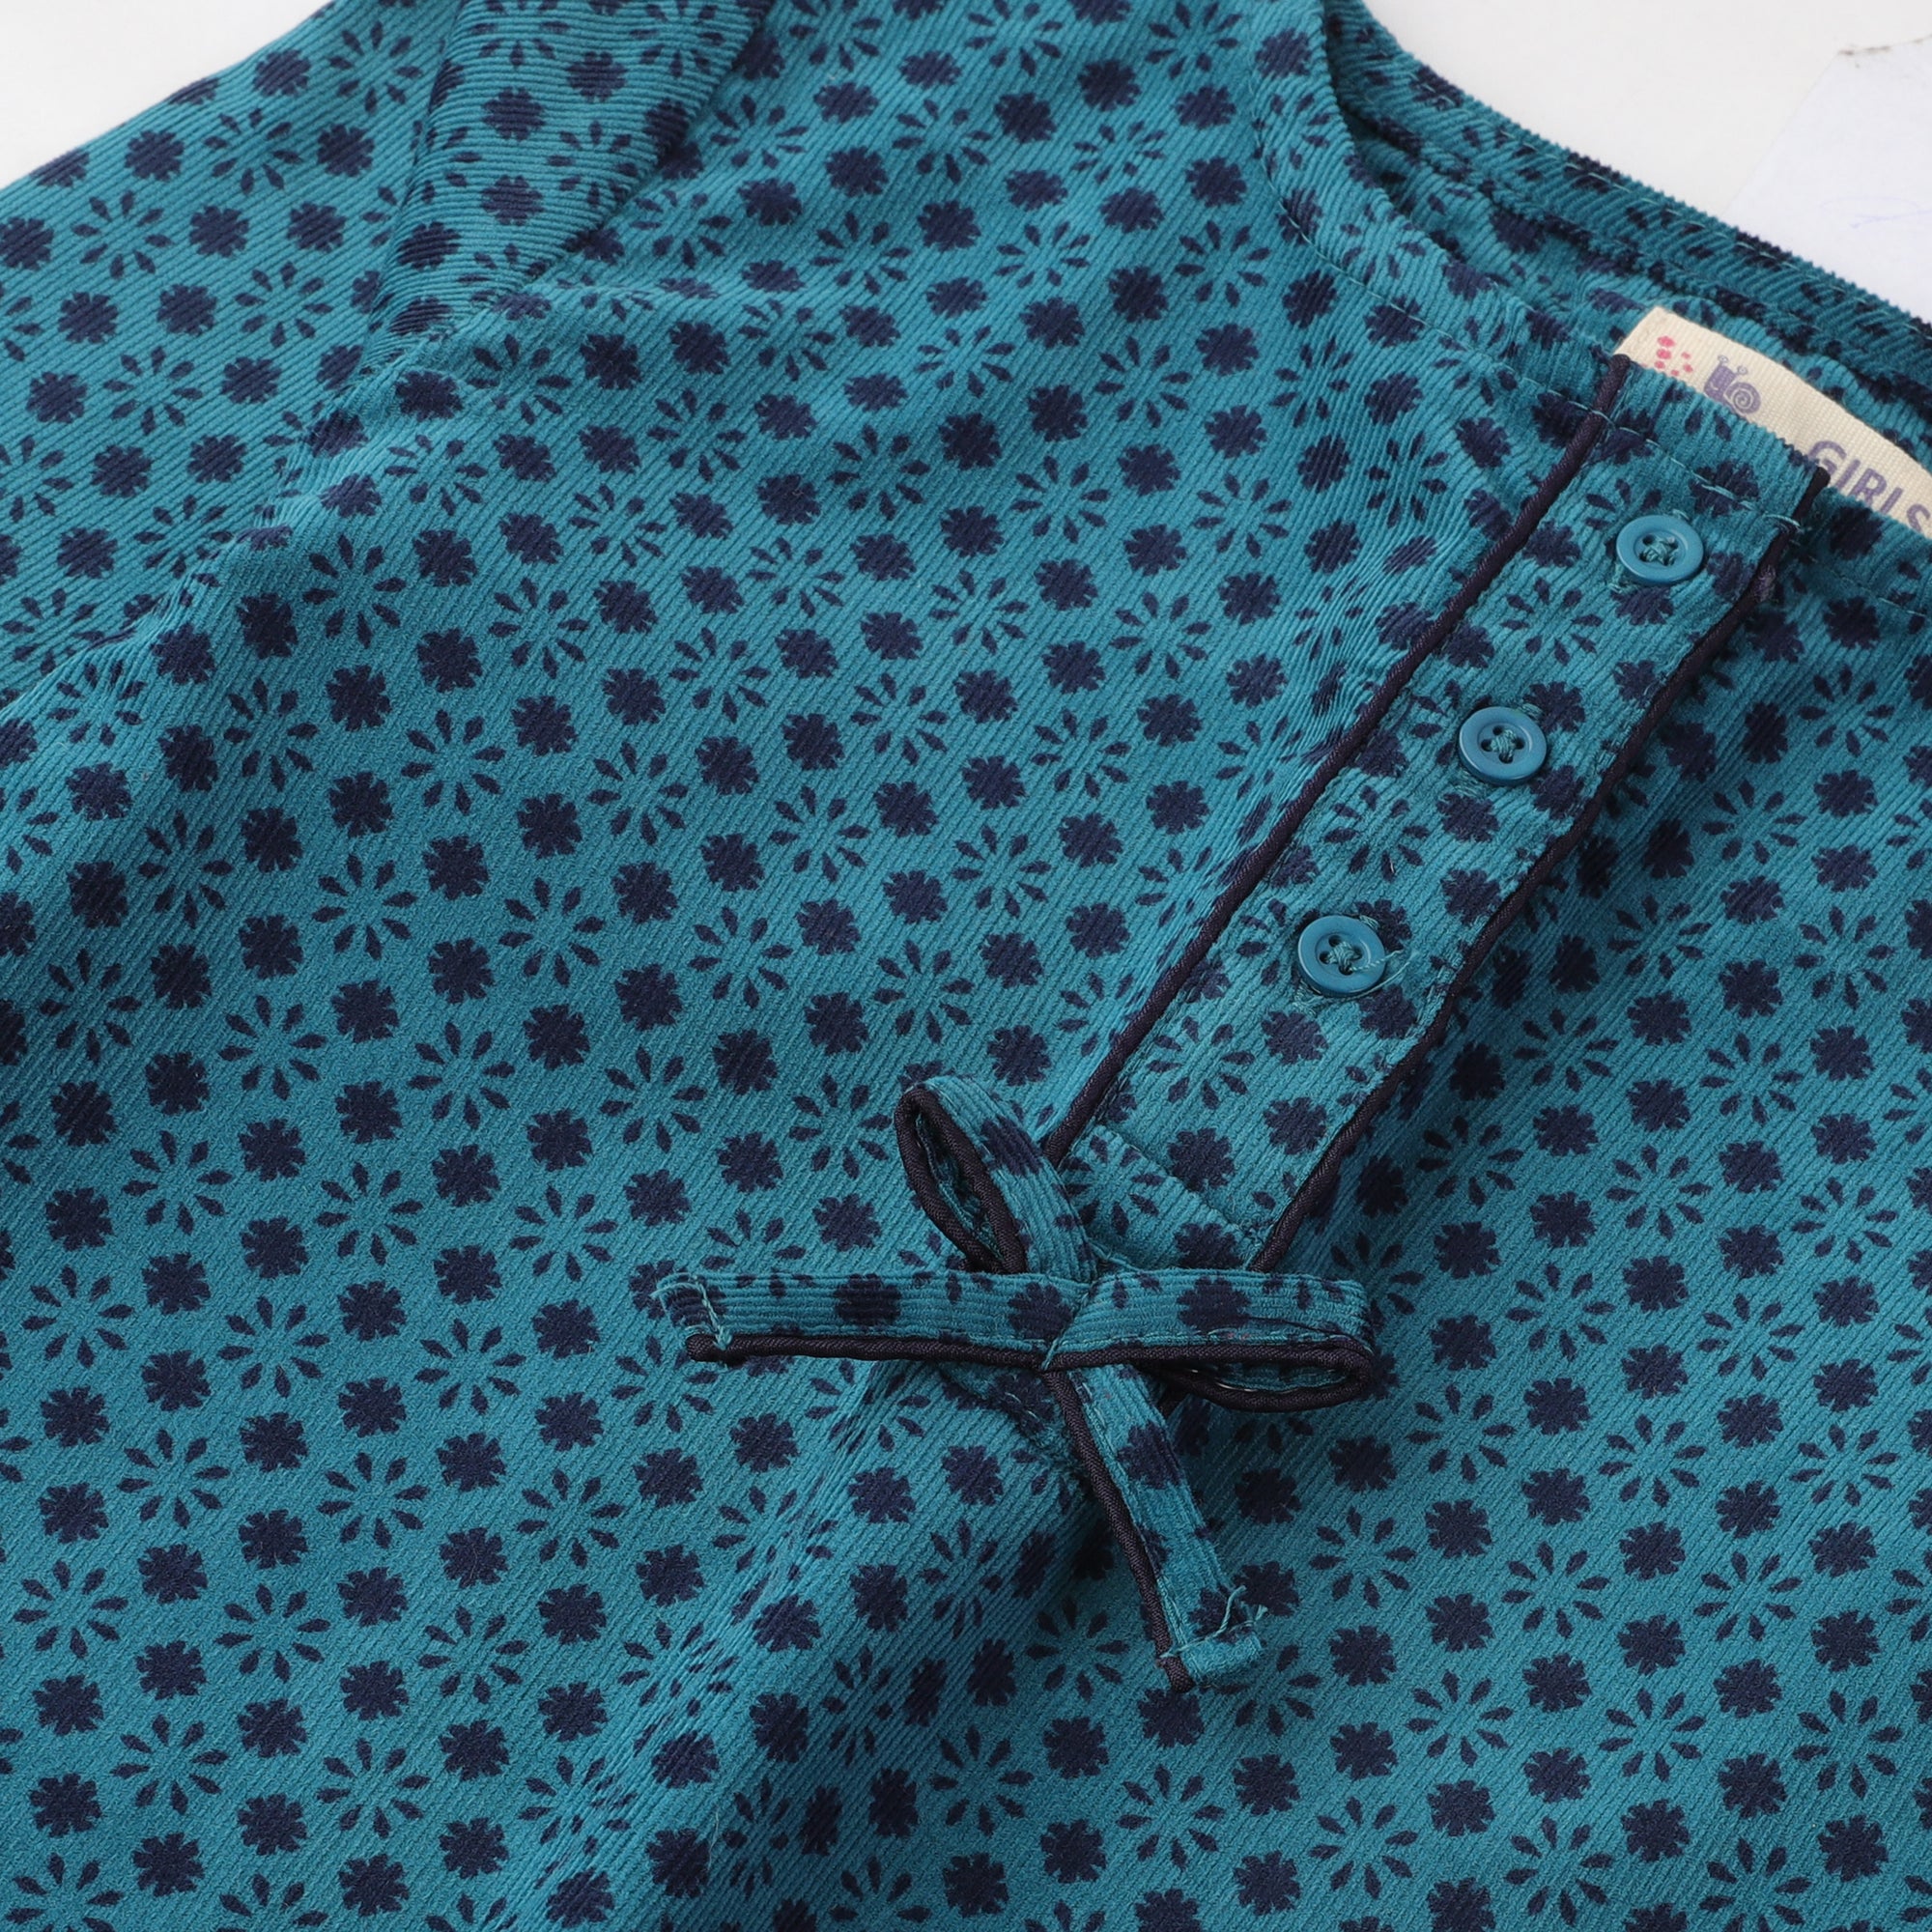 Everyday Teal Top